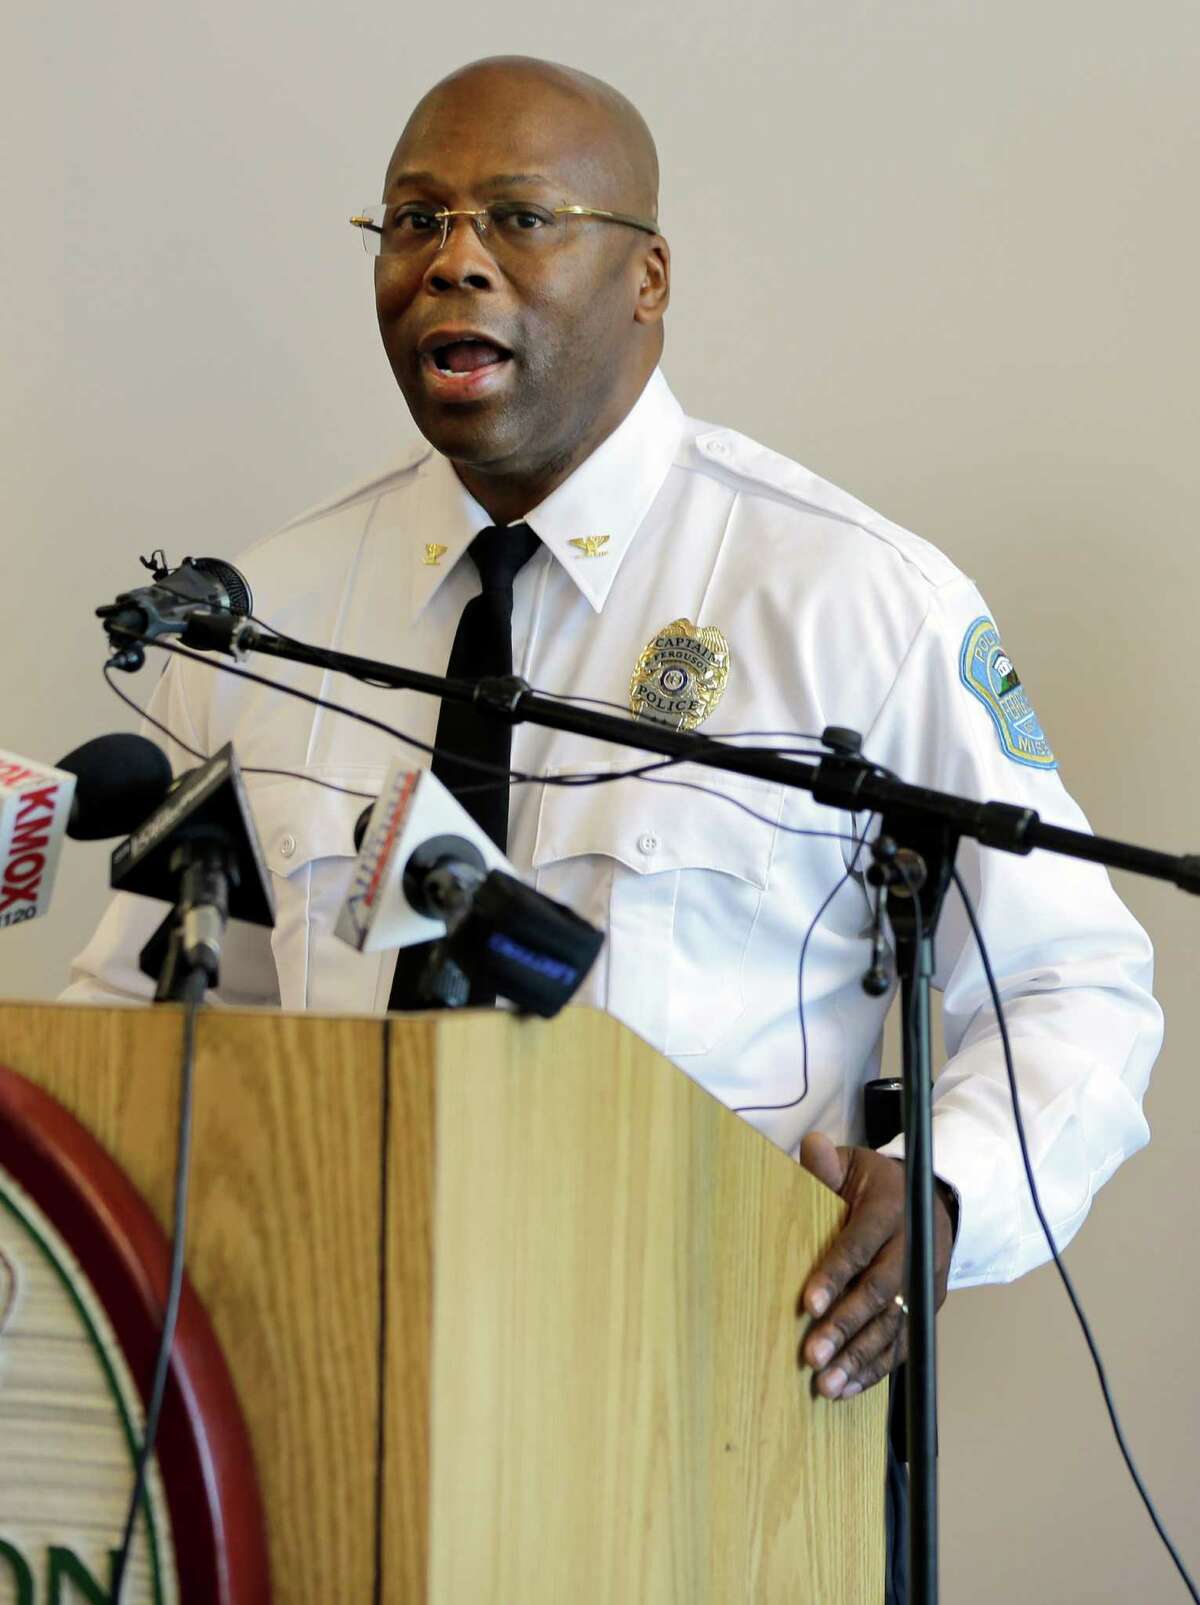 Andre Anderson speaks during a news conference announcing him as the interim police chief of the Ferguson Police Department Wednesday, July 22, 2015, in Ferguson, Mo. Anderson becomes the second interim chief since Police Chief Thomas Jackson stepped down in March.(AP Photo/Jeff Roberson)